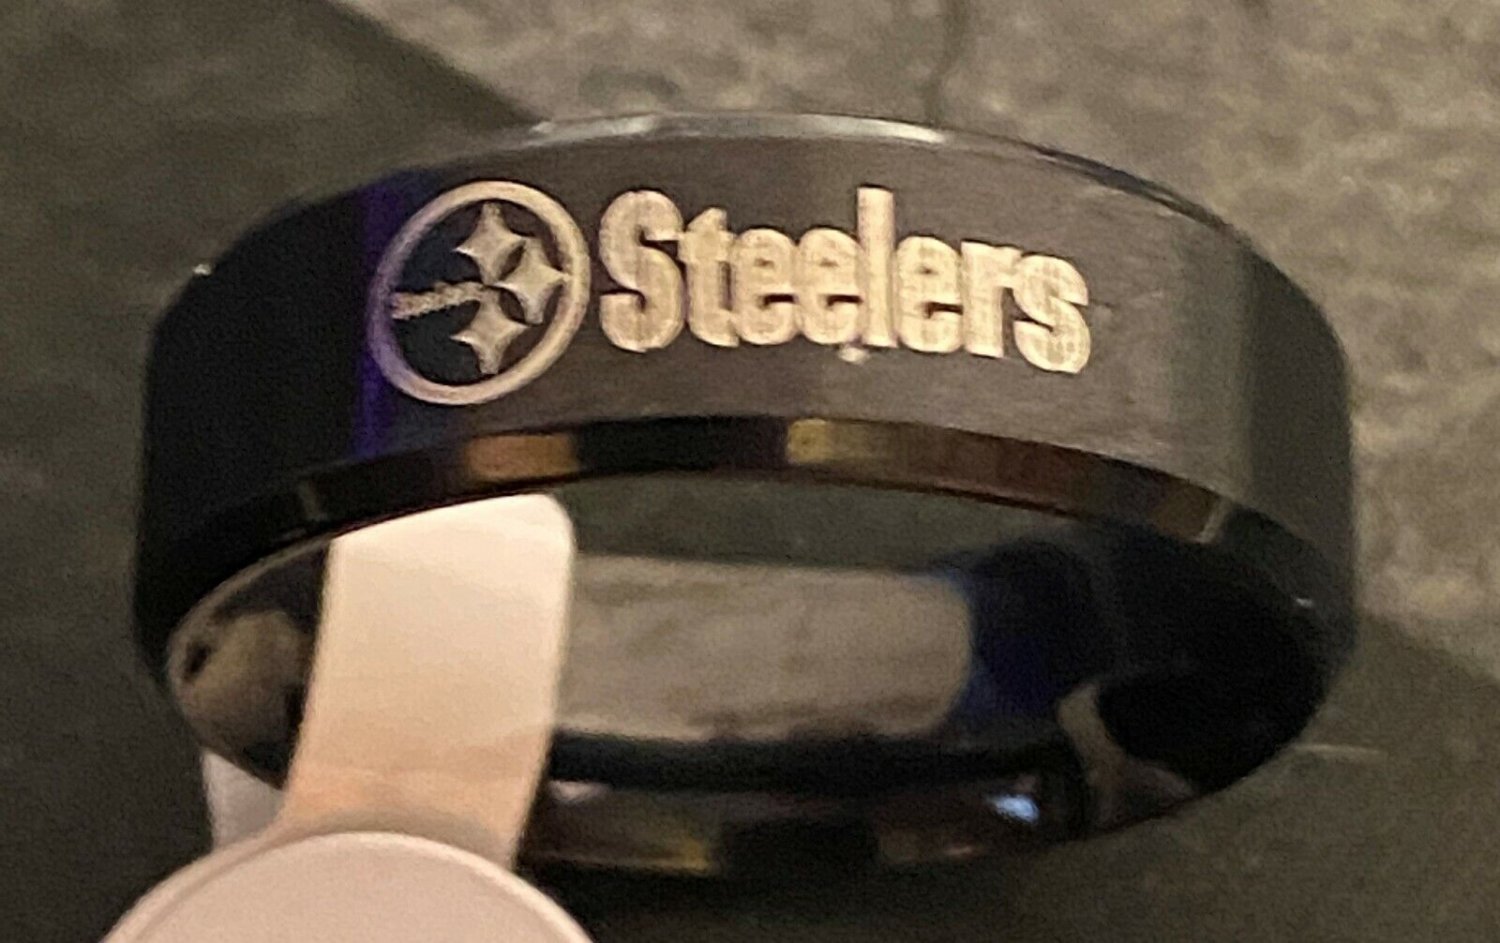 Pittsburgh Steelers titanium ring size 12